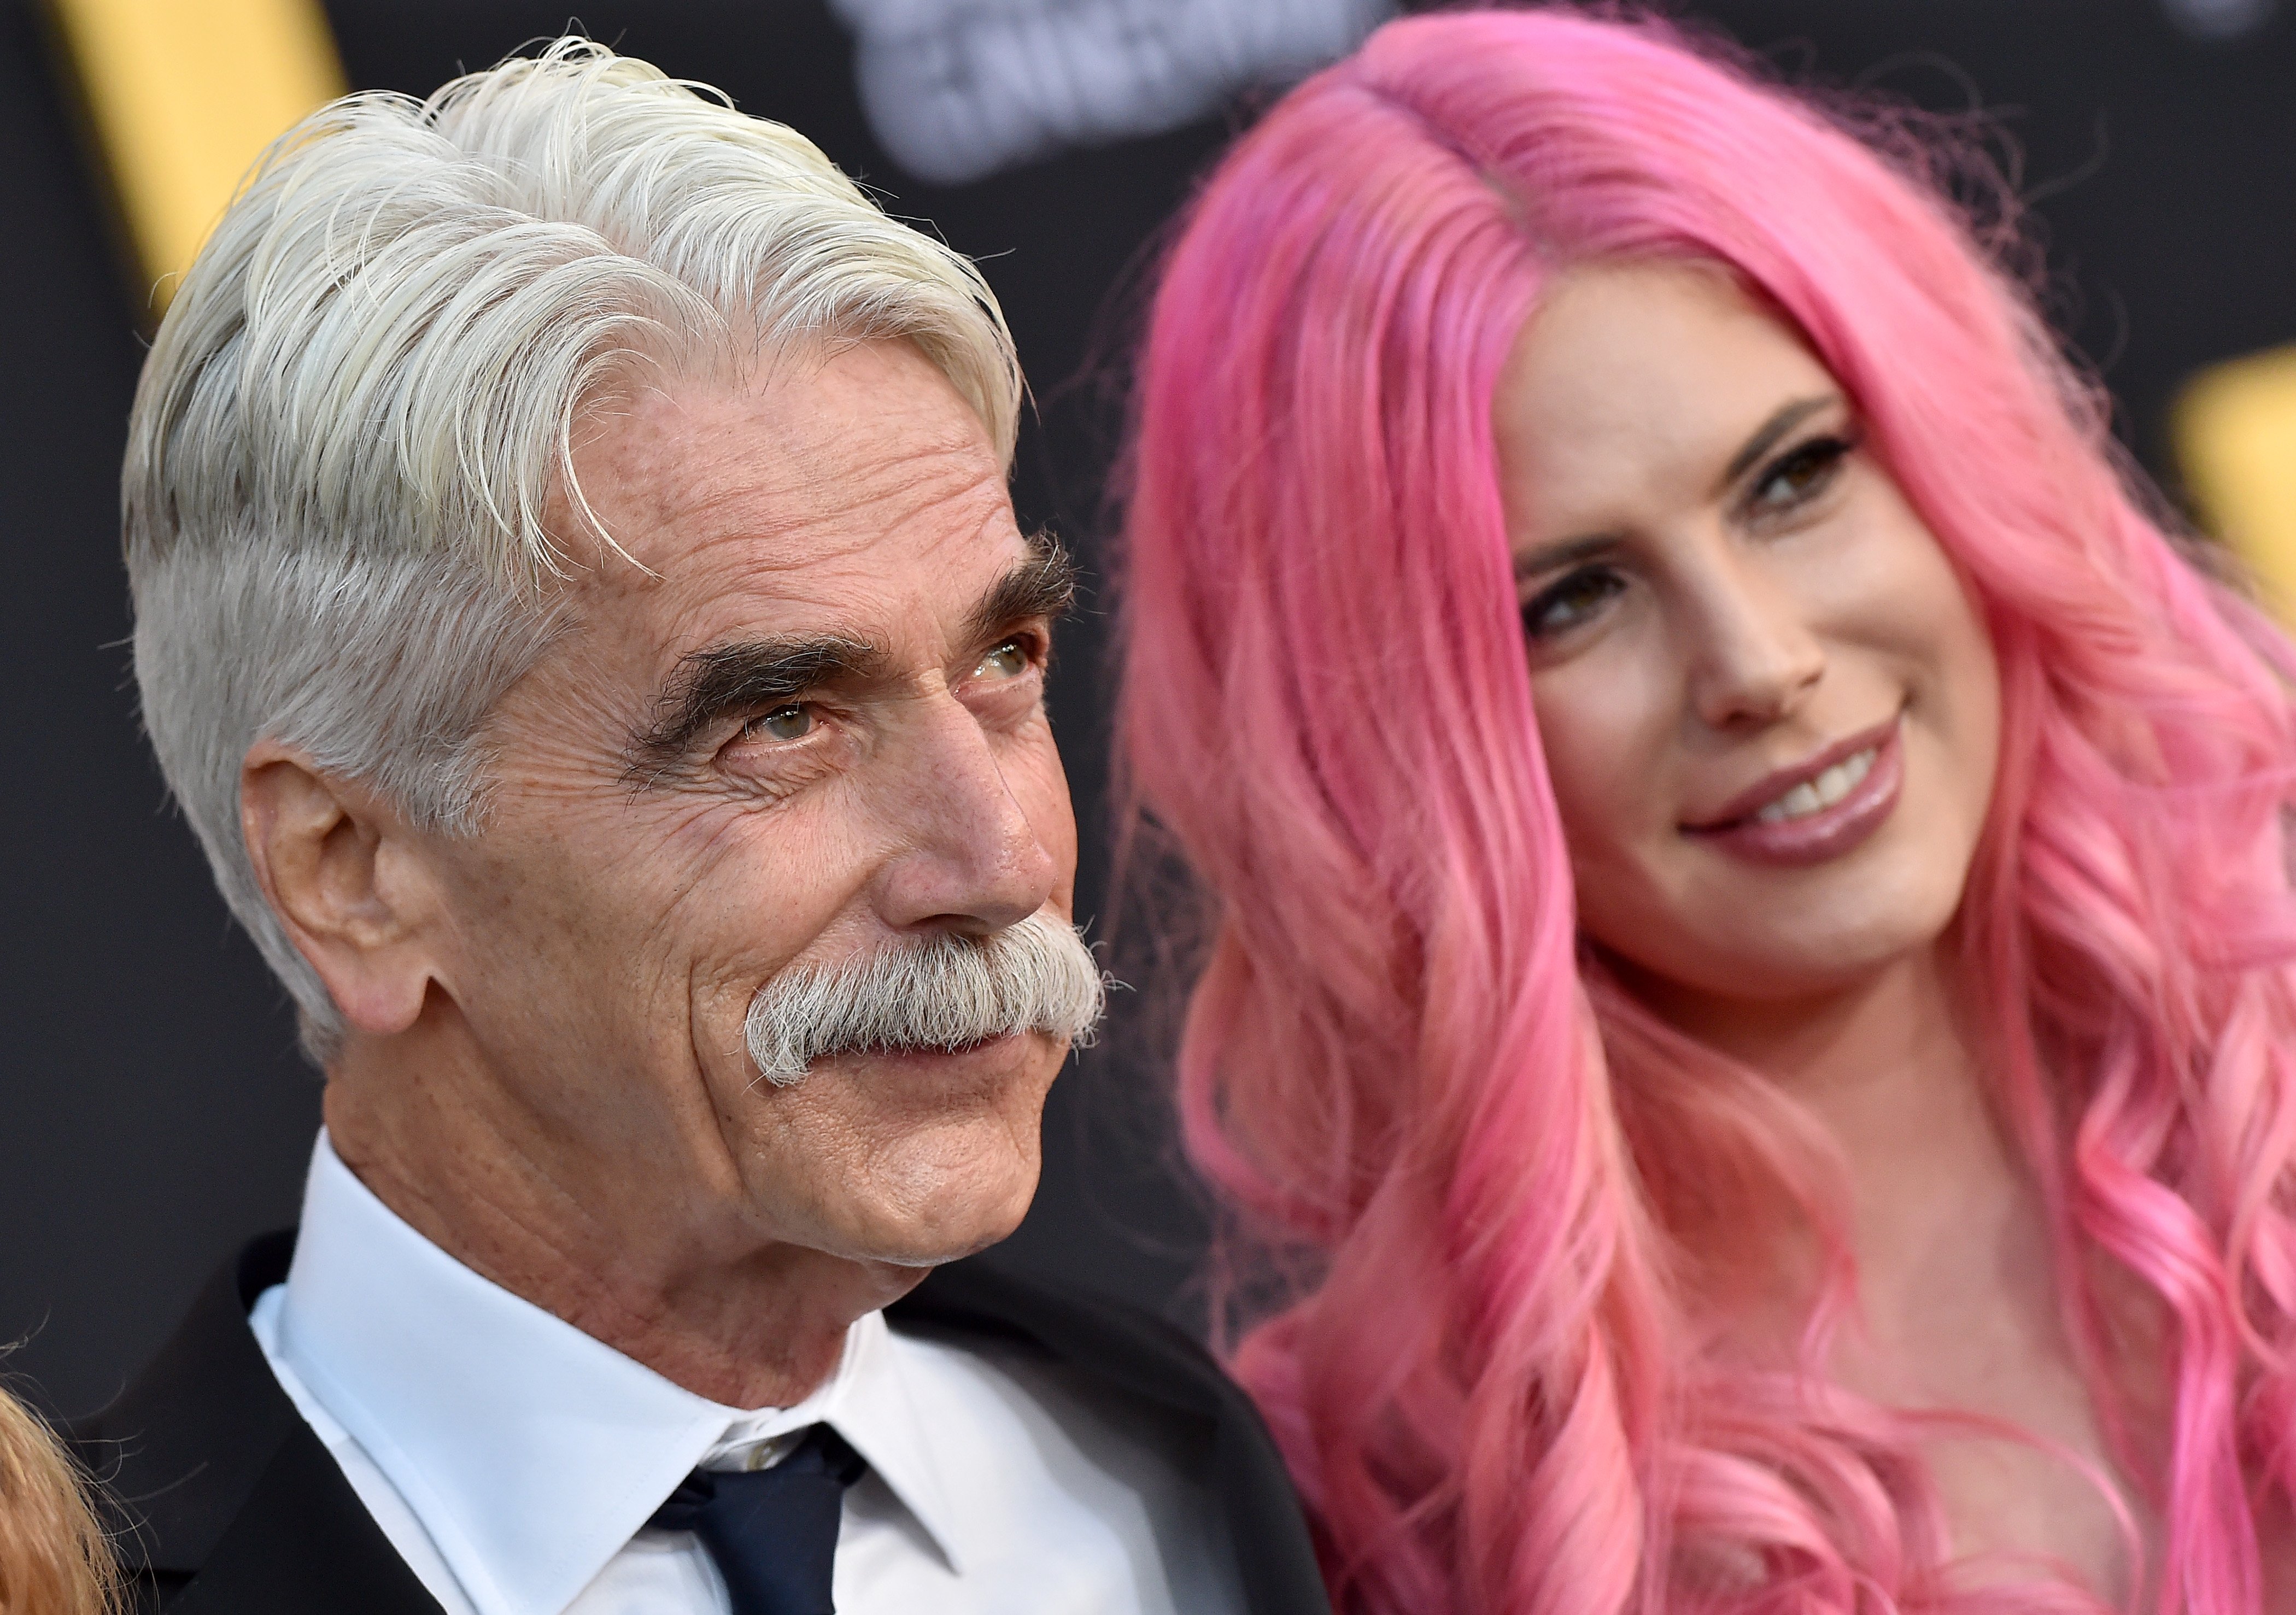 Sam Elliott and his daughter Cleo Rose Elliott at the premiere of "A Star Is Born" on September 24, 2018, in Los Angeles, California | Source: Getty Images